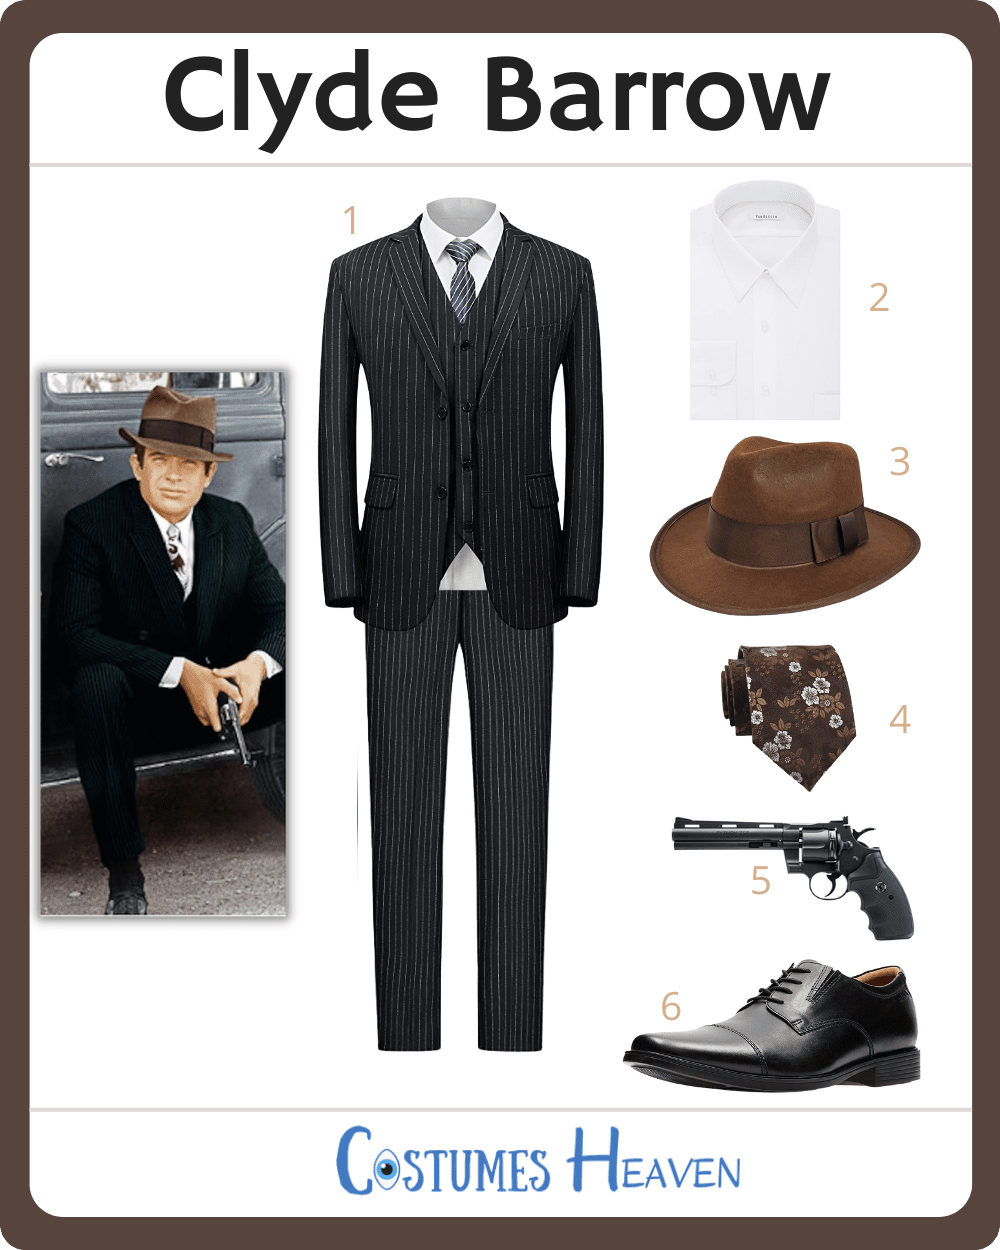 bonnie and clyde costume